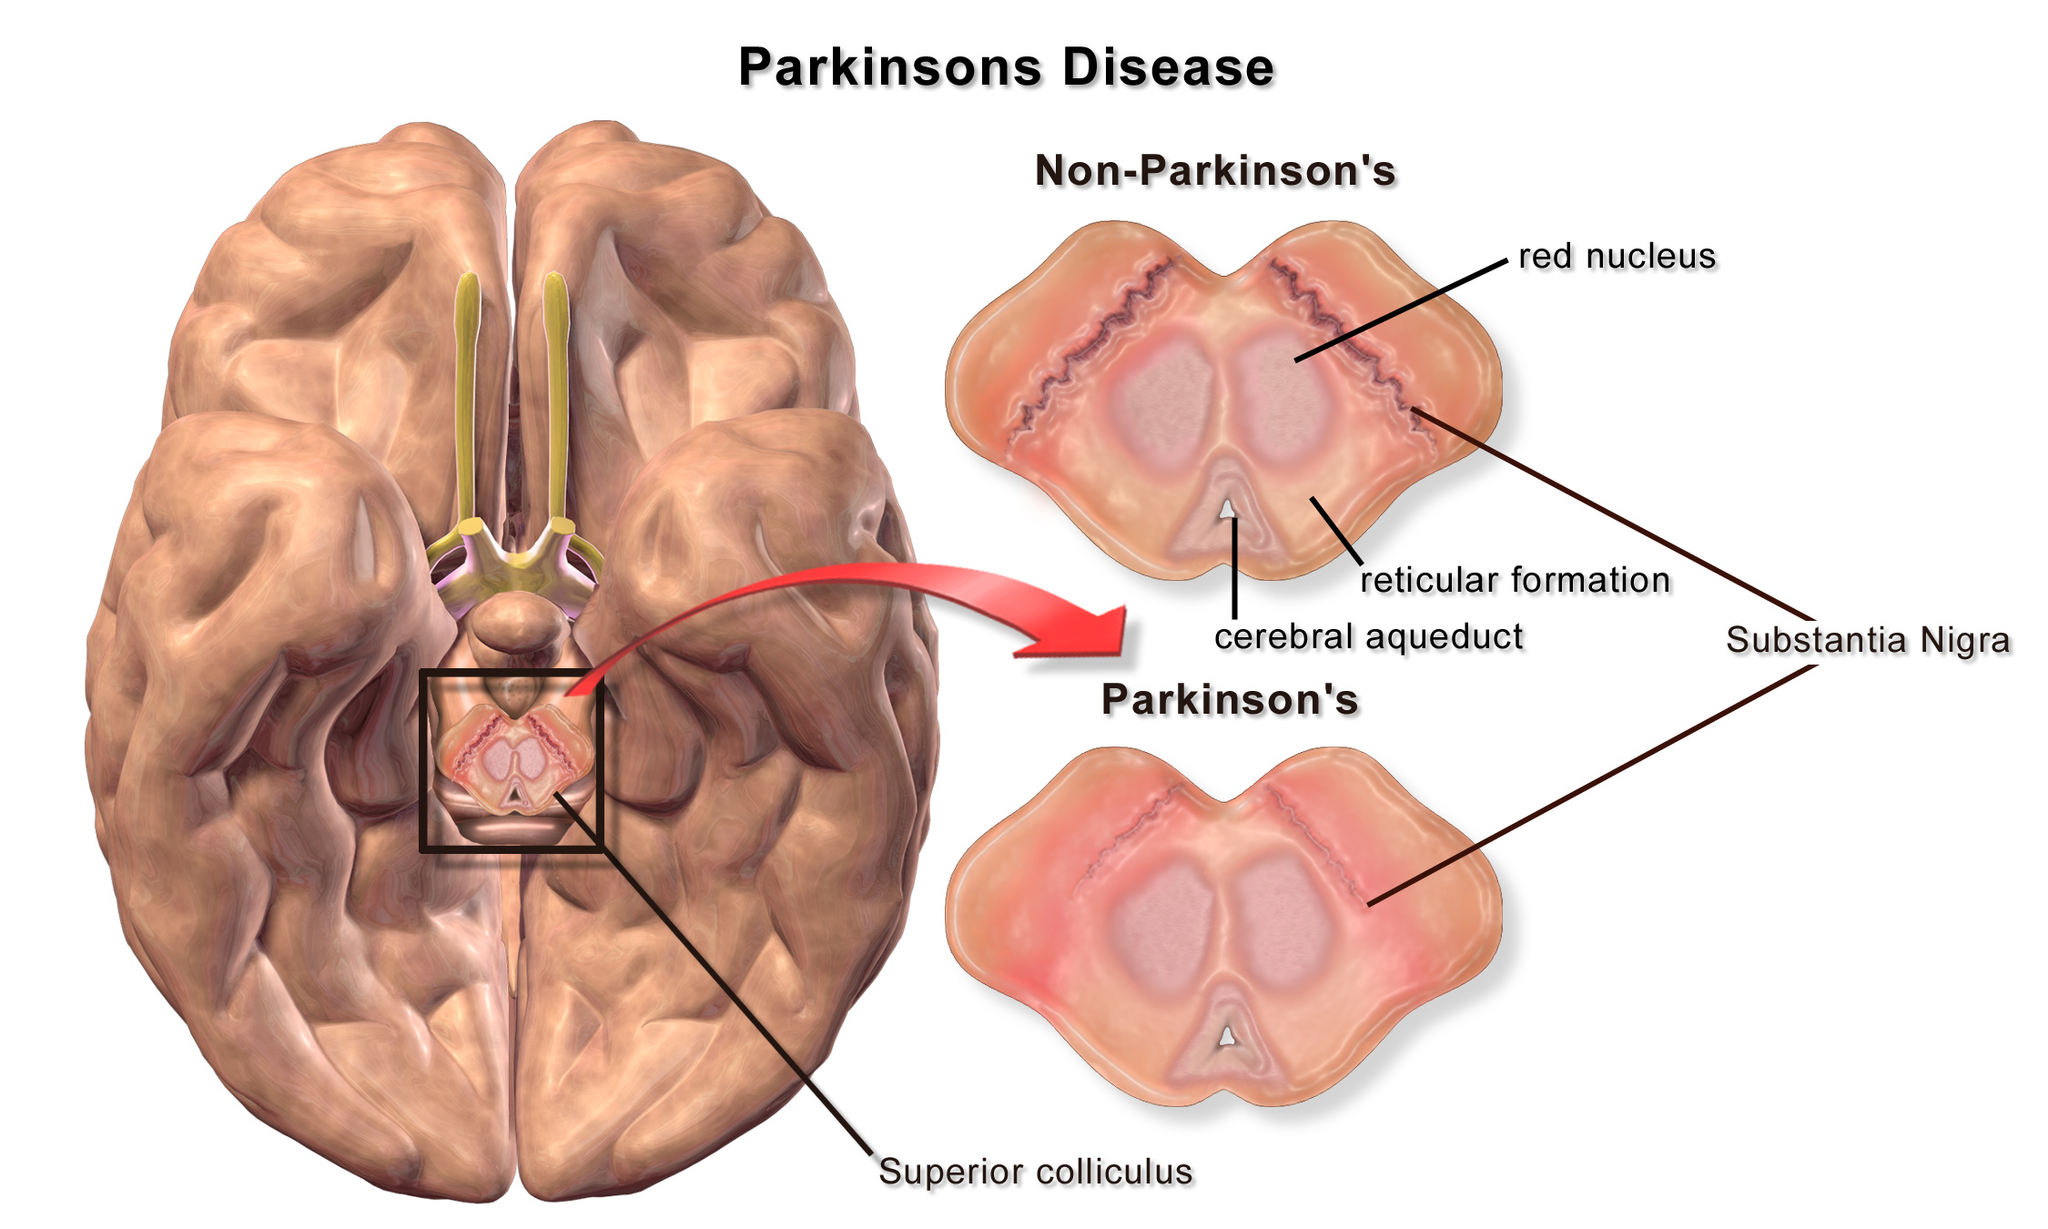 Can CBD Oil Be Used For Treating Parkinson’s Disease?